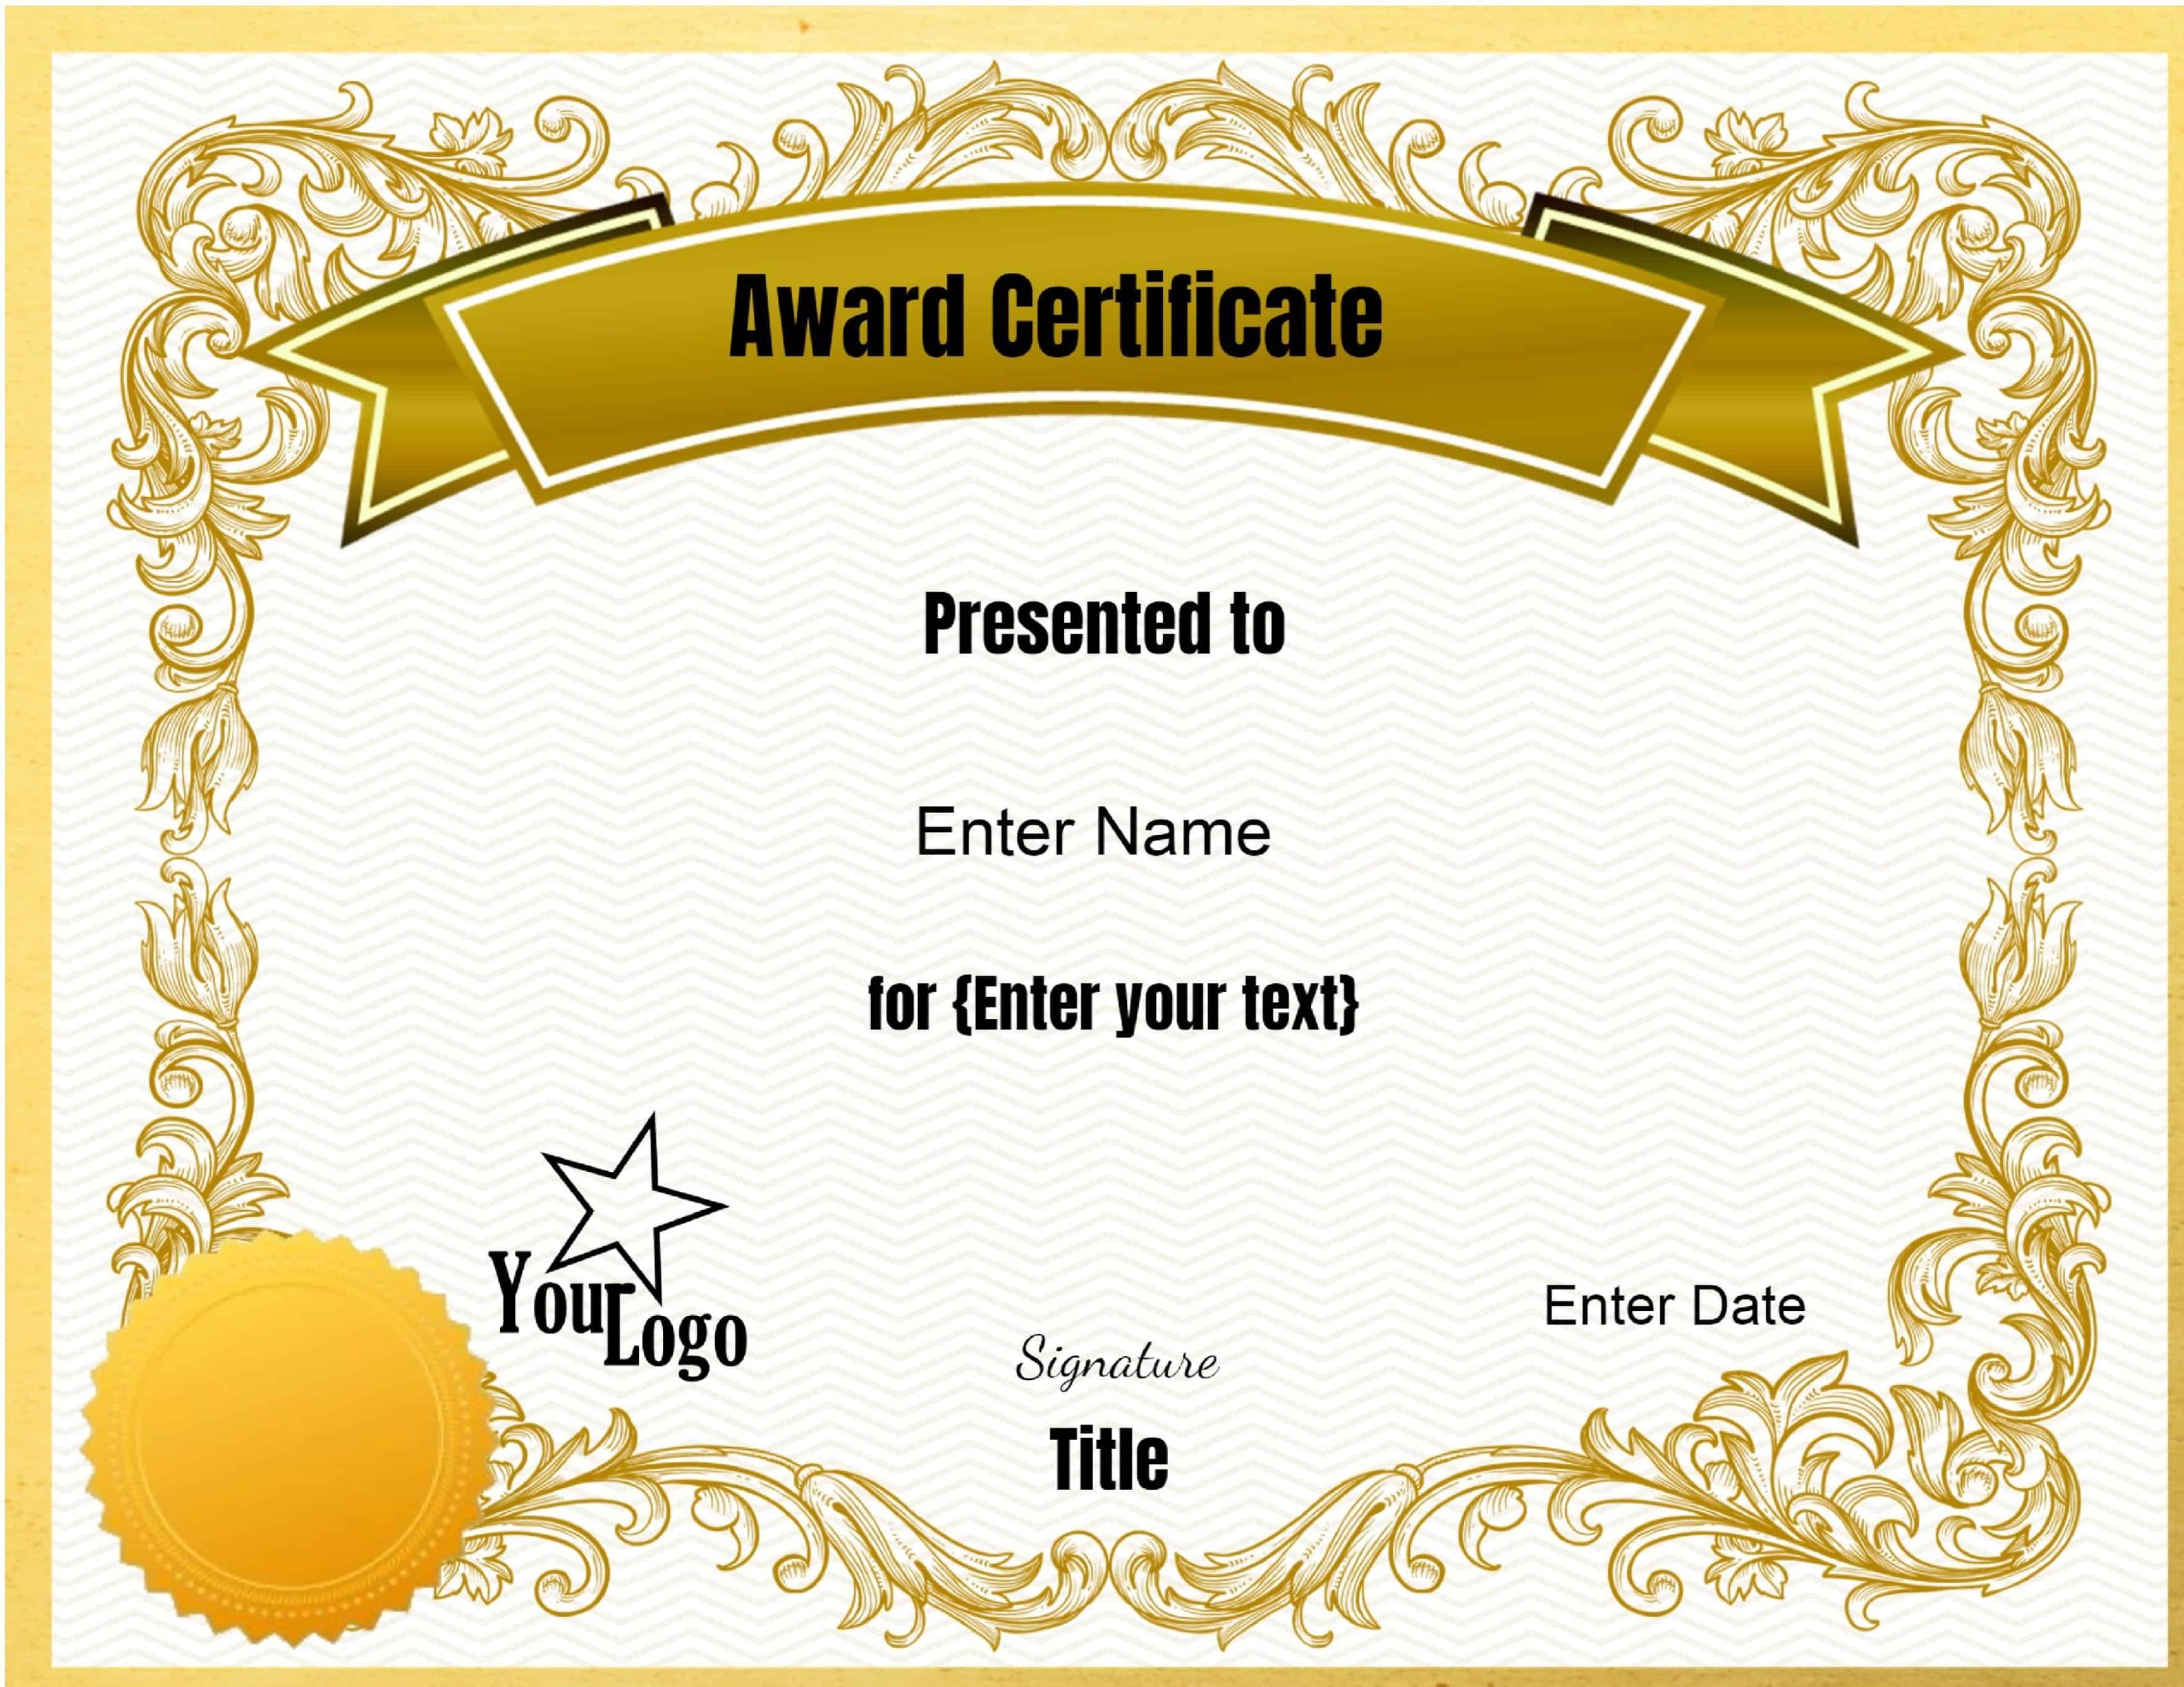 Free Editable Certificate Template | Customize Online & Print At Home Pertaining To Award Certificate Border Template